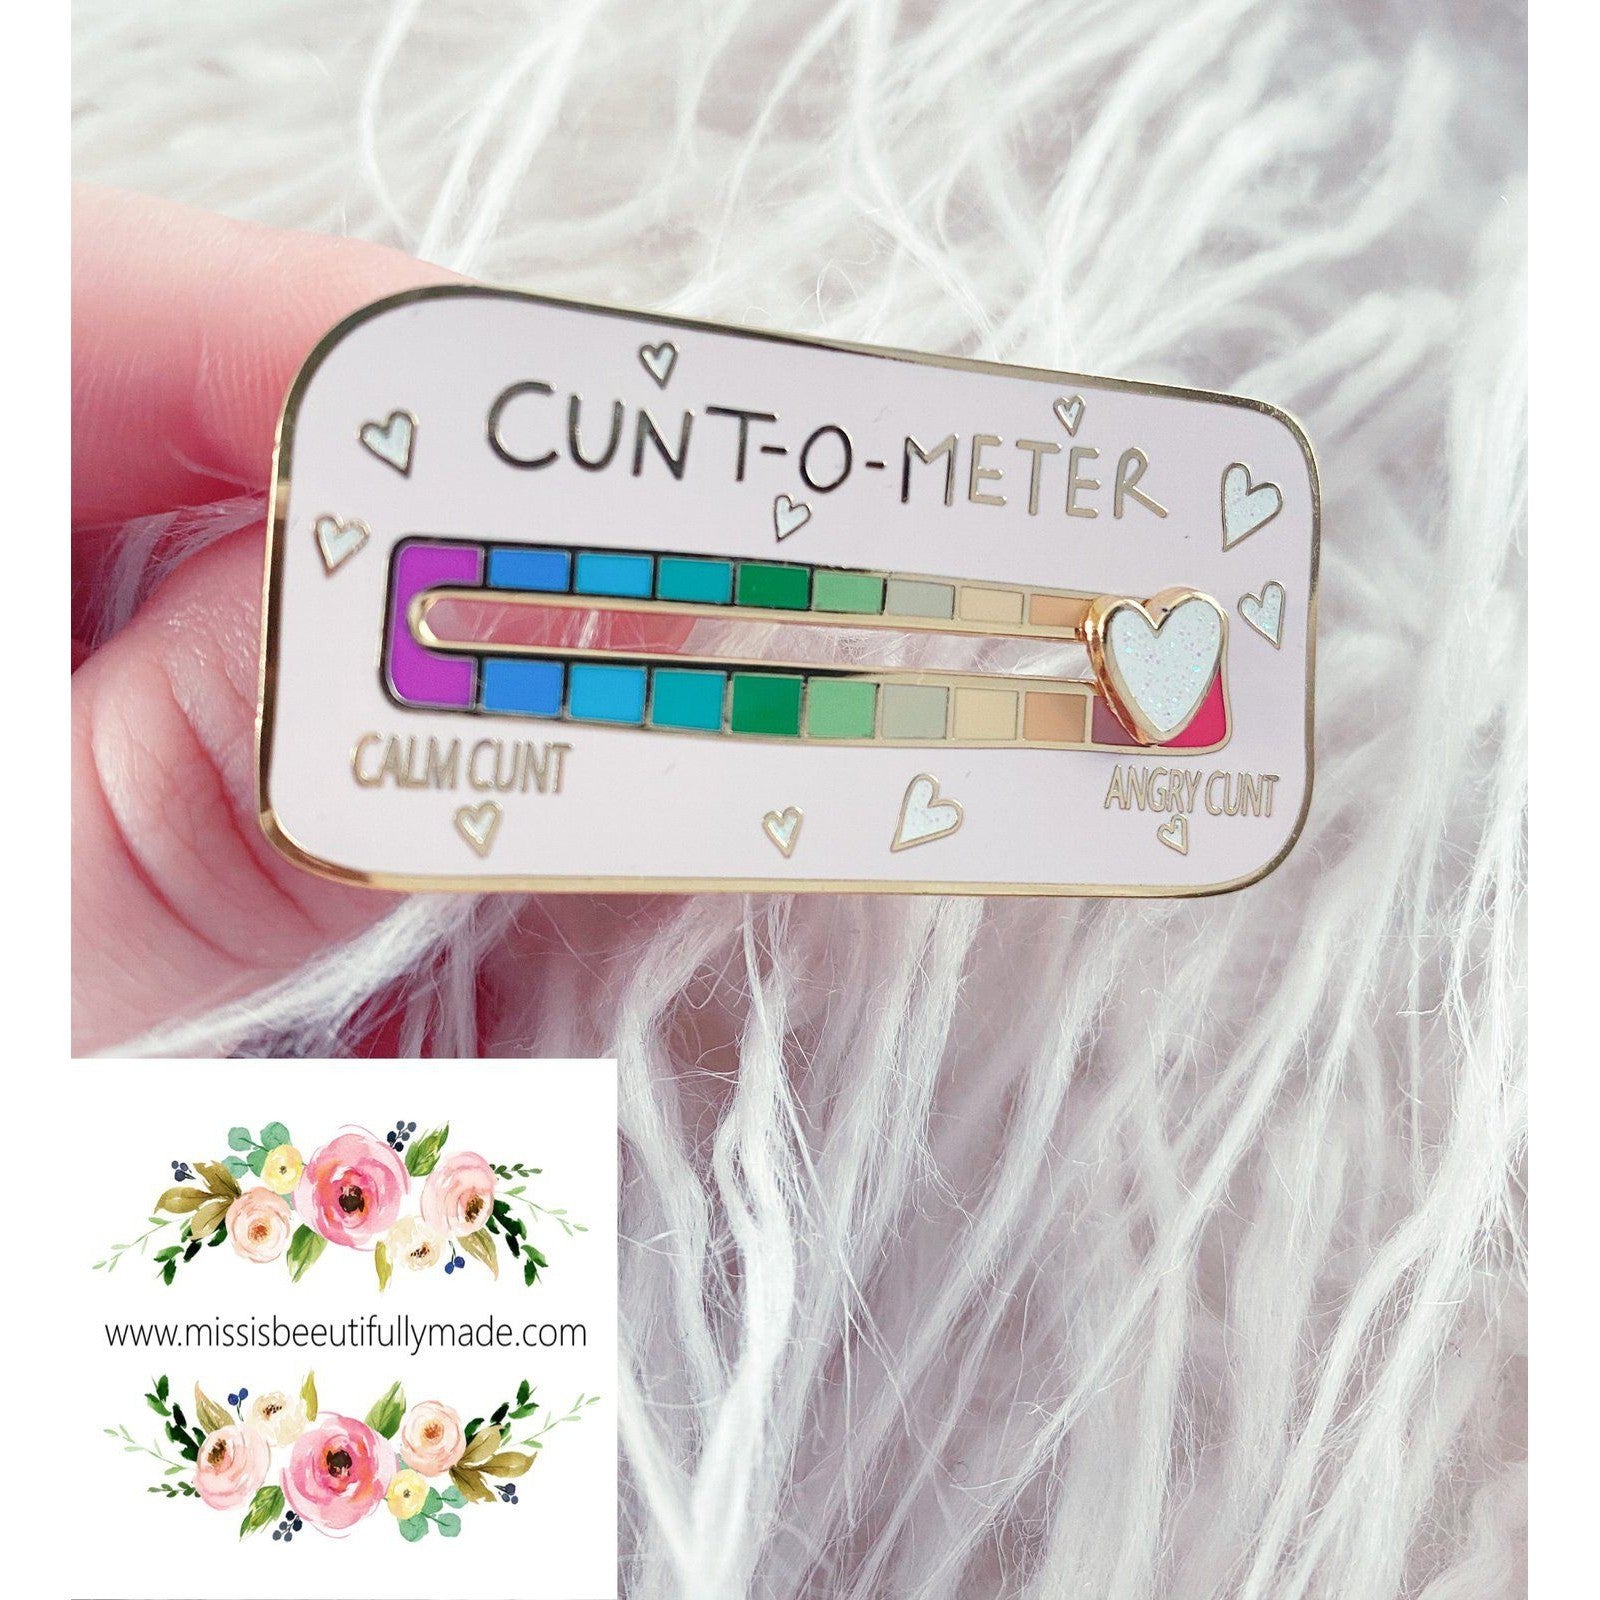 Gold enamel cunt-o-meter pin badge with a white glittery sliding heart. Slide from calm cunt to angry cunt with this funny interactive pin badge with pretty pastel rainbow colours.